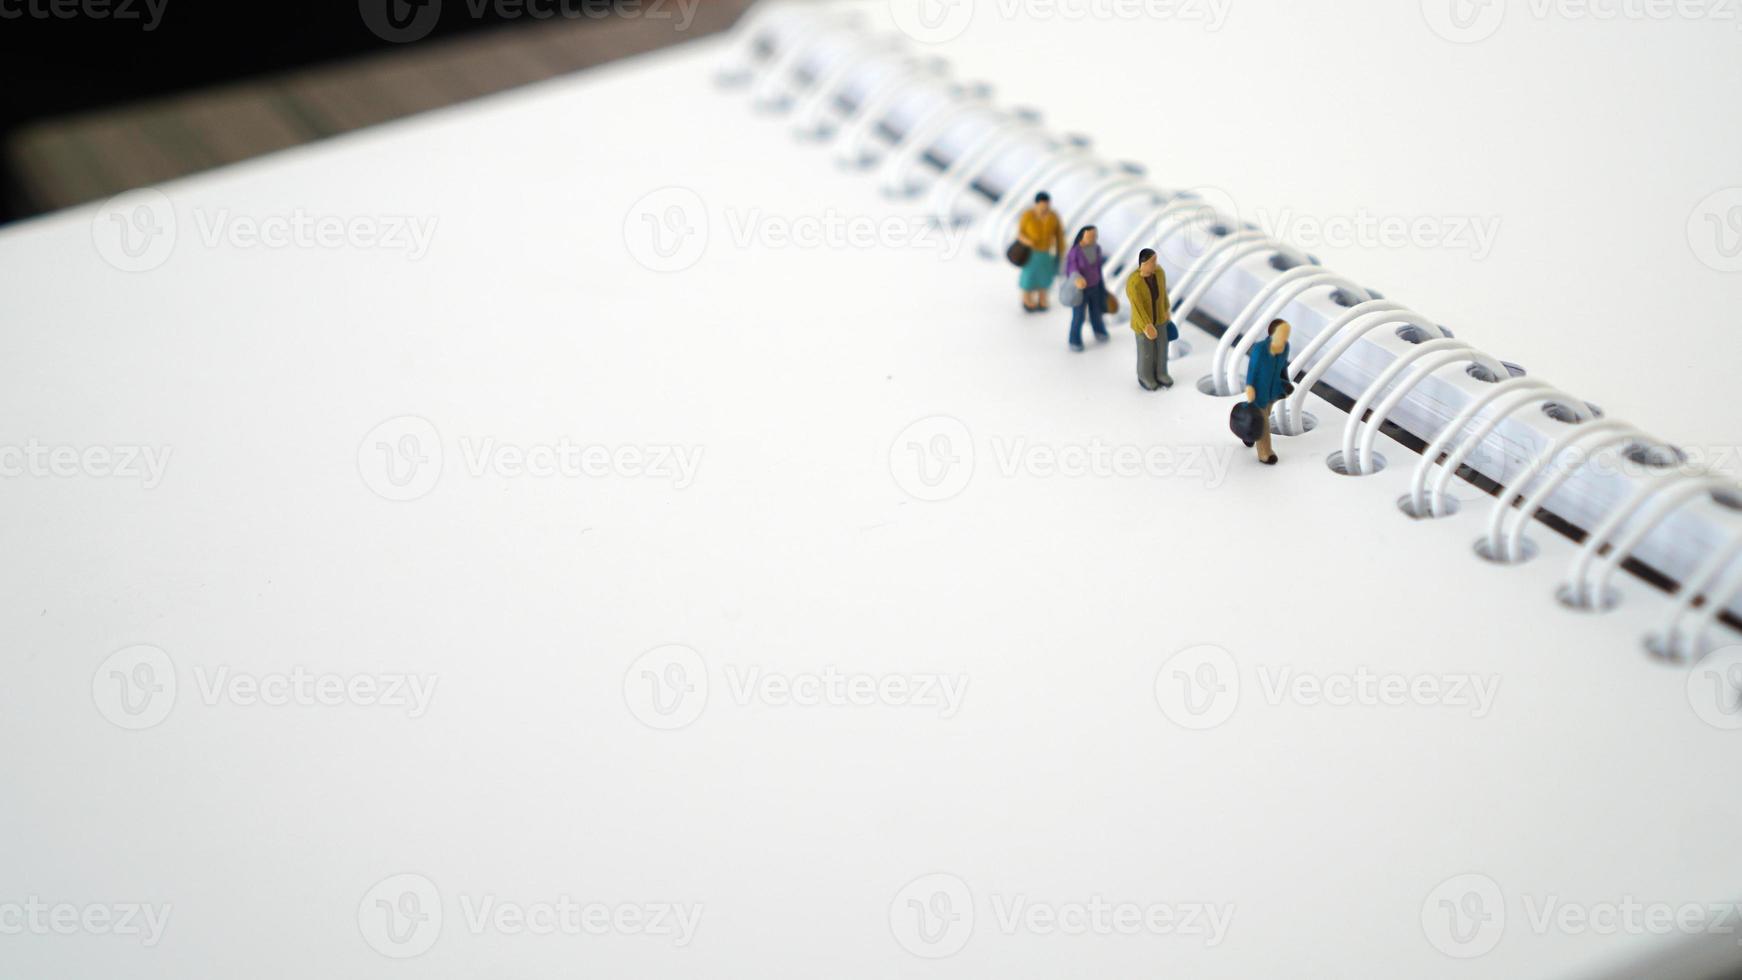 Miniature people in group walking on white blank Book. Business concept with copy space and white space for your text or design photo